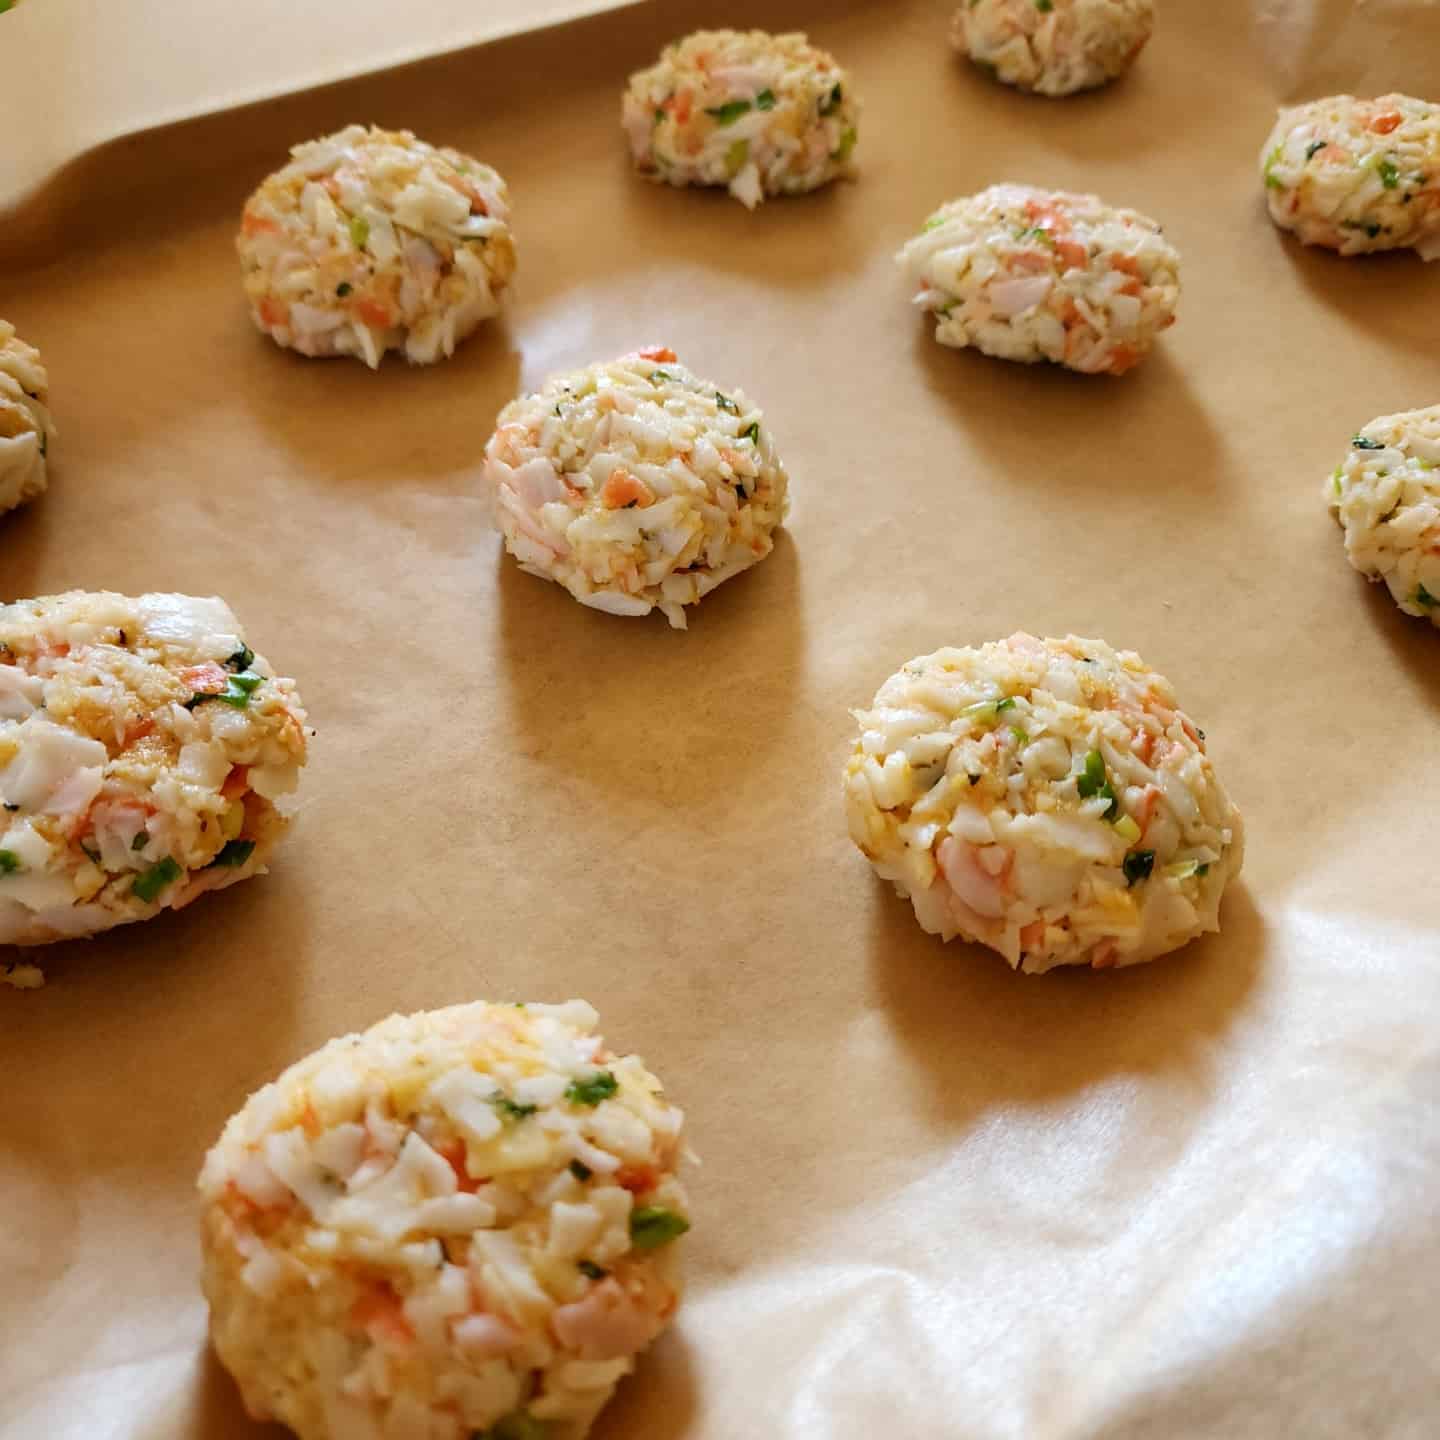 Crab cakes frozen to firm up